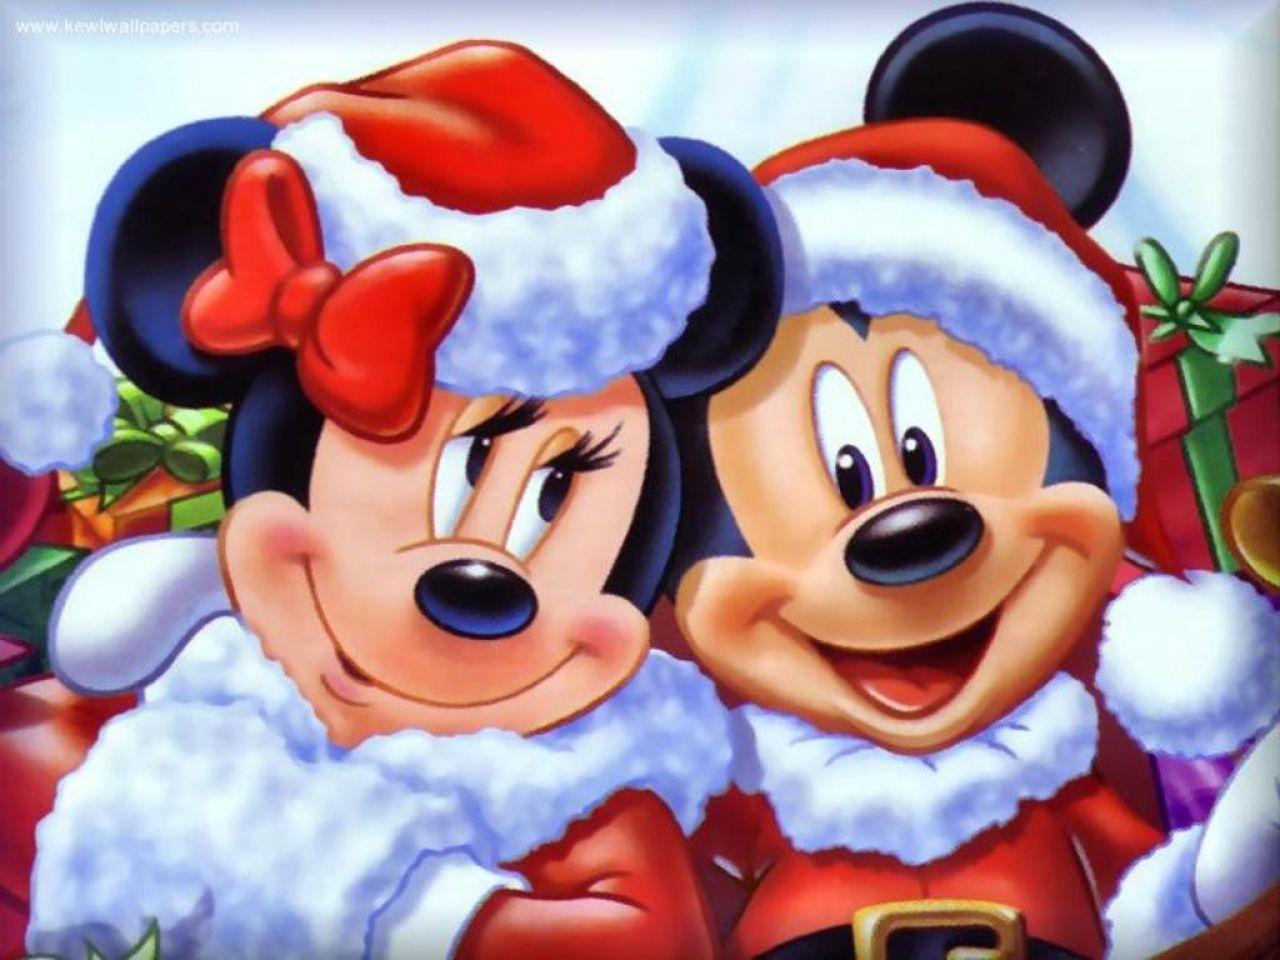 Mickey & Minnie Mouse Wallpaper Image Download Wallpaper